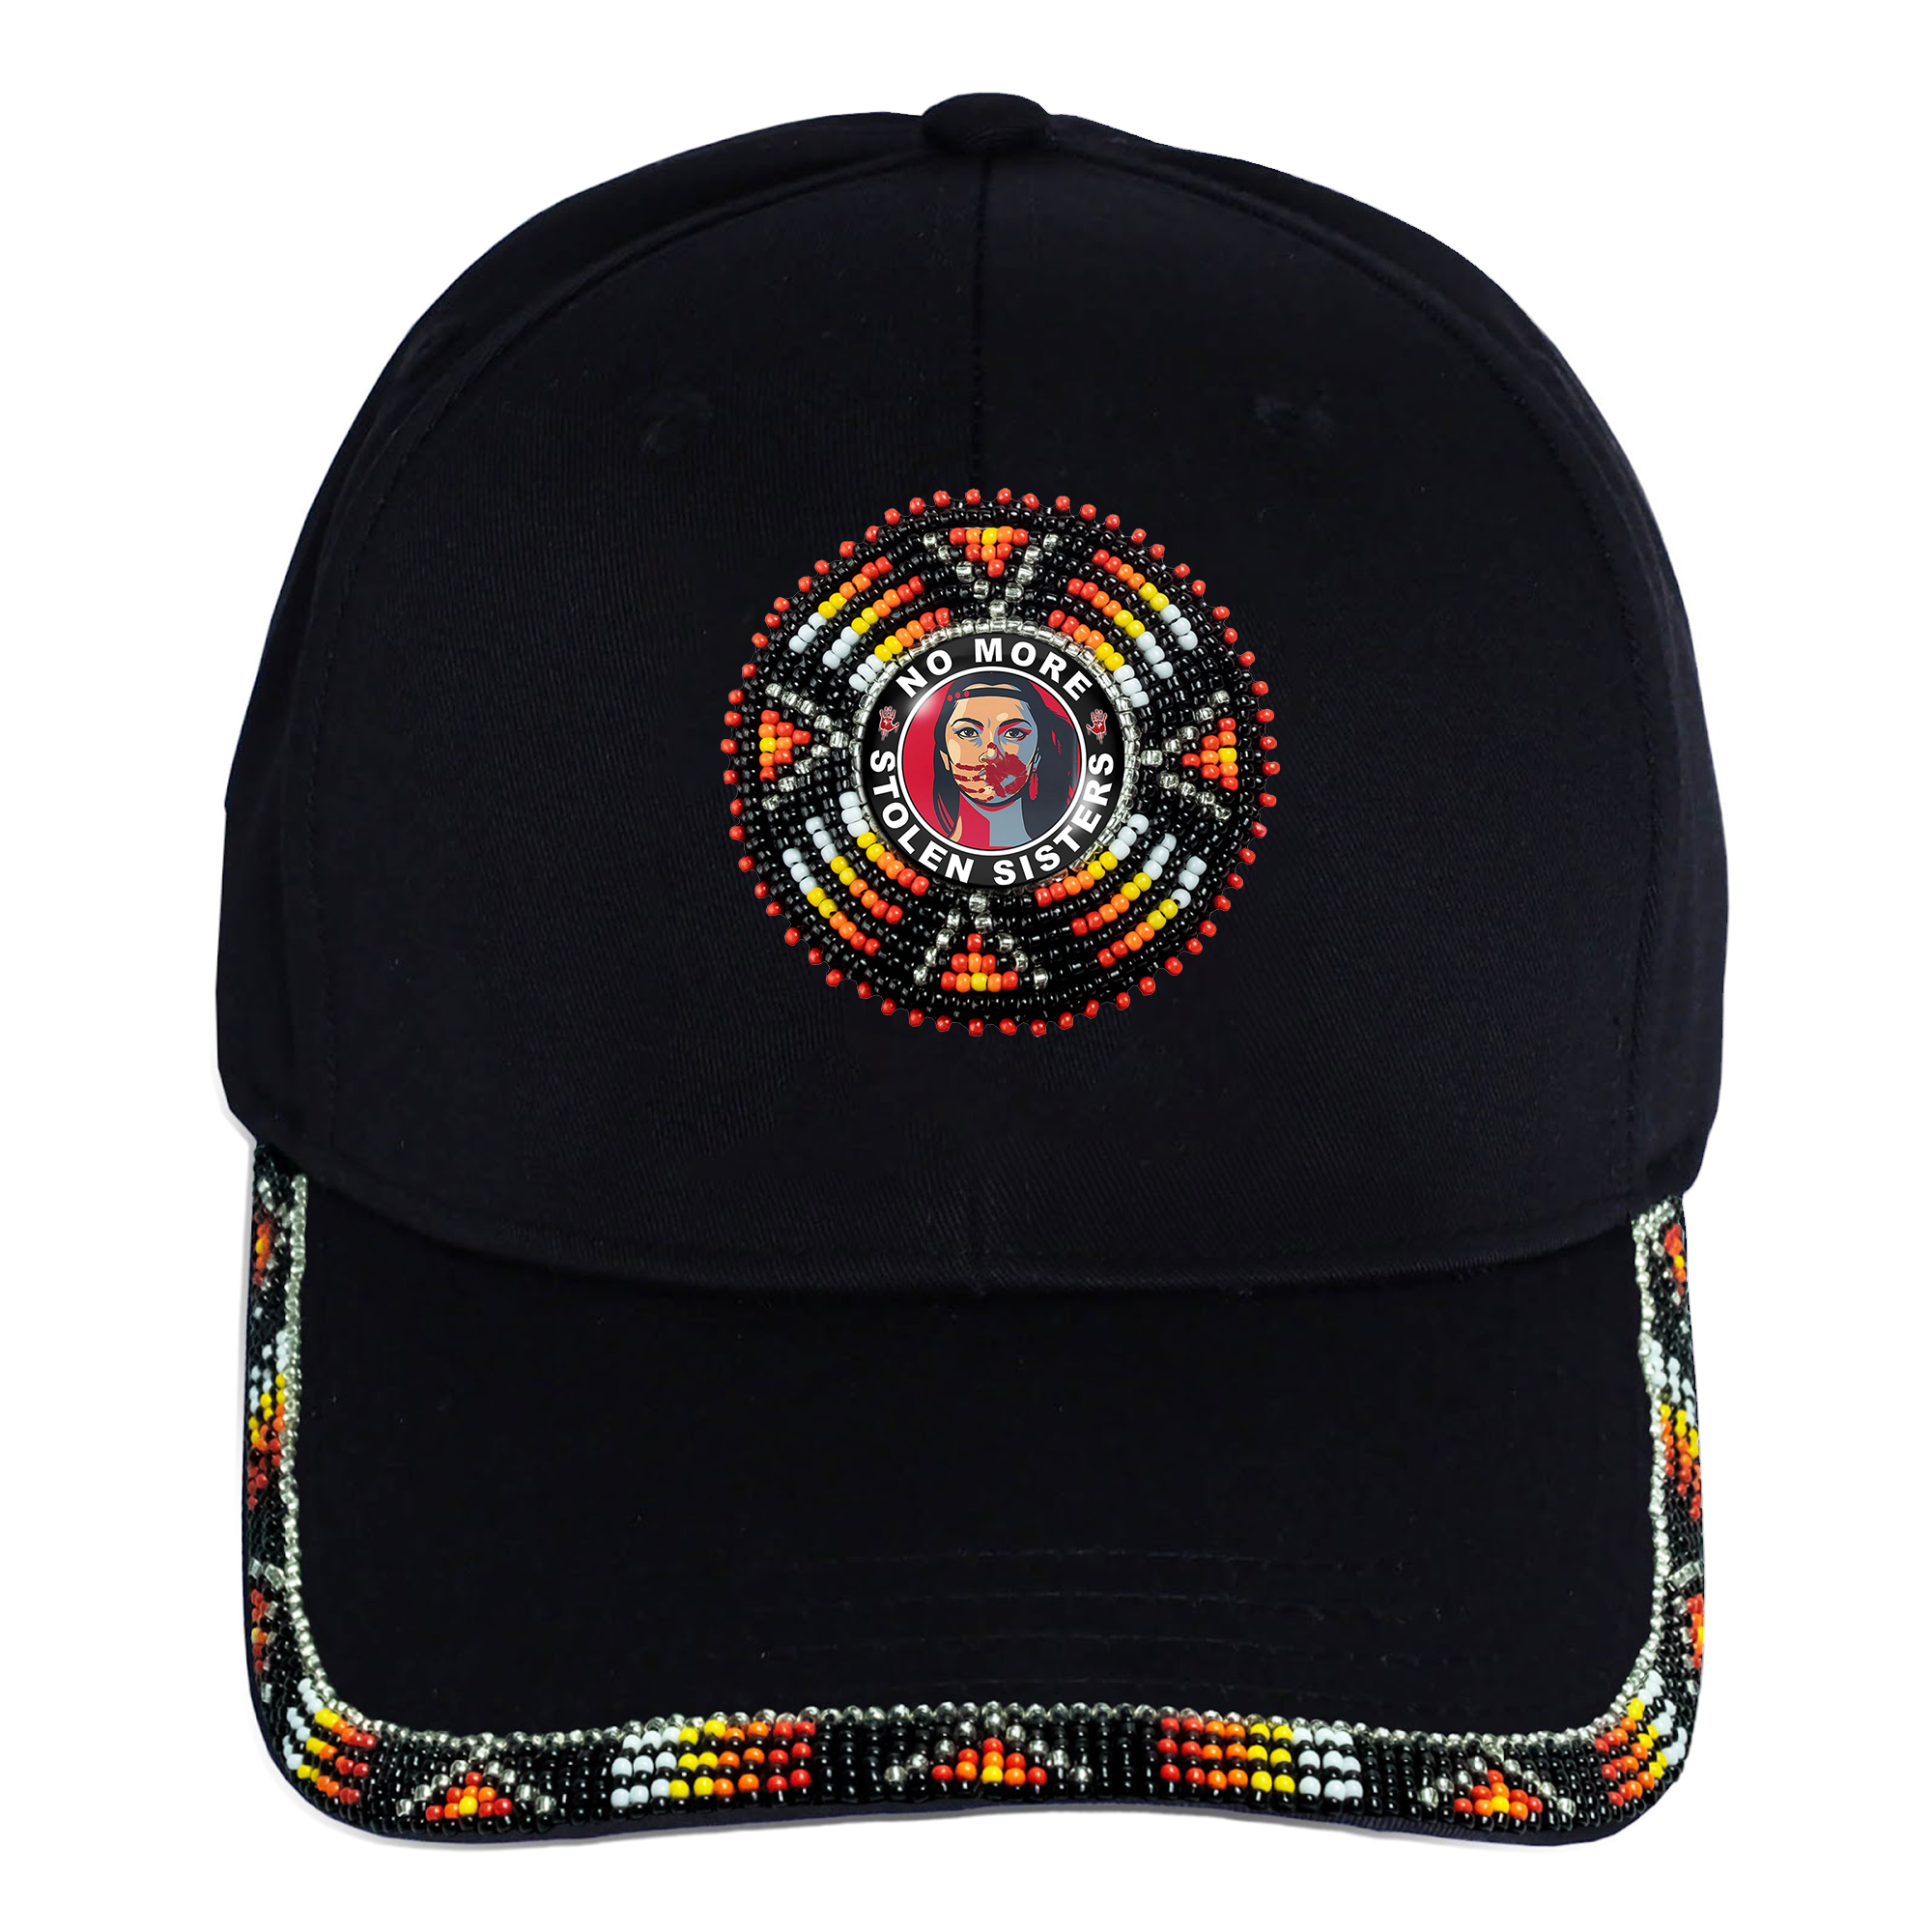 SALE 50% OFF  - Cotton Unisex Baseball Cap Patch Glass with Colorful Brim Beaded Native American Style